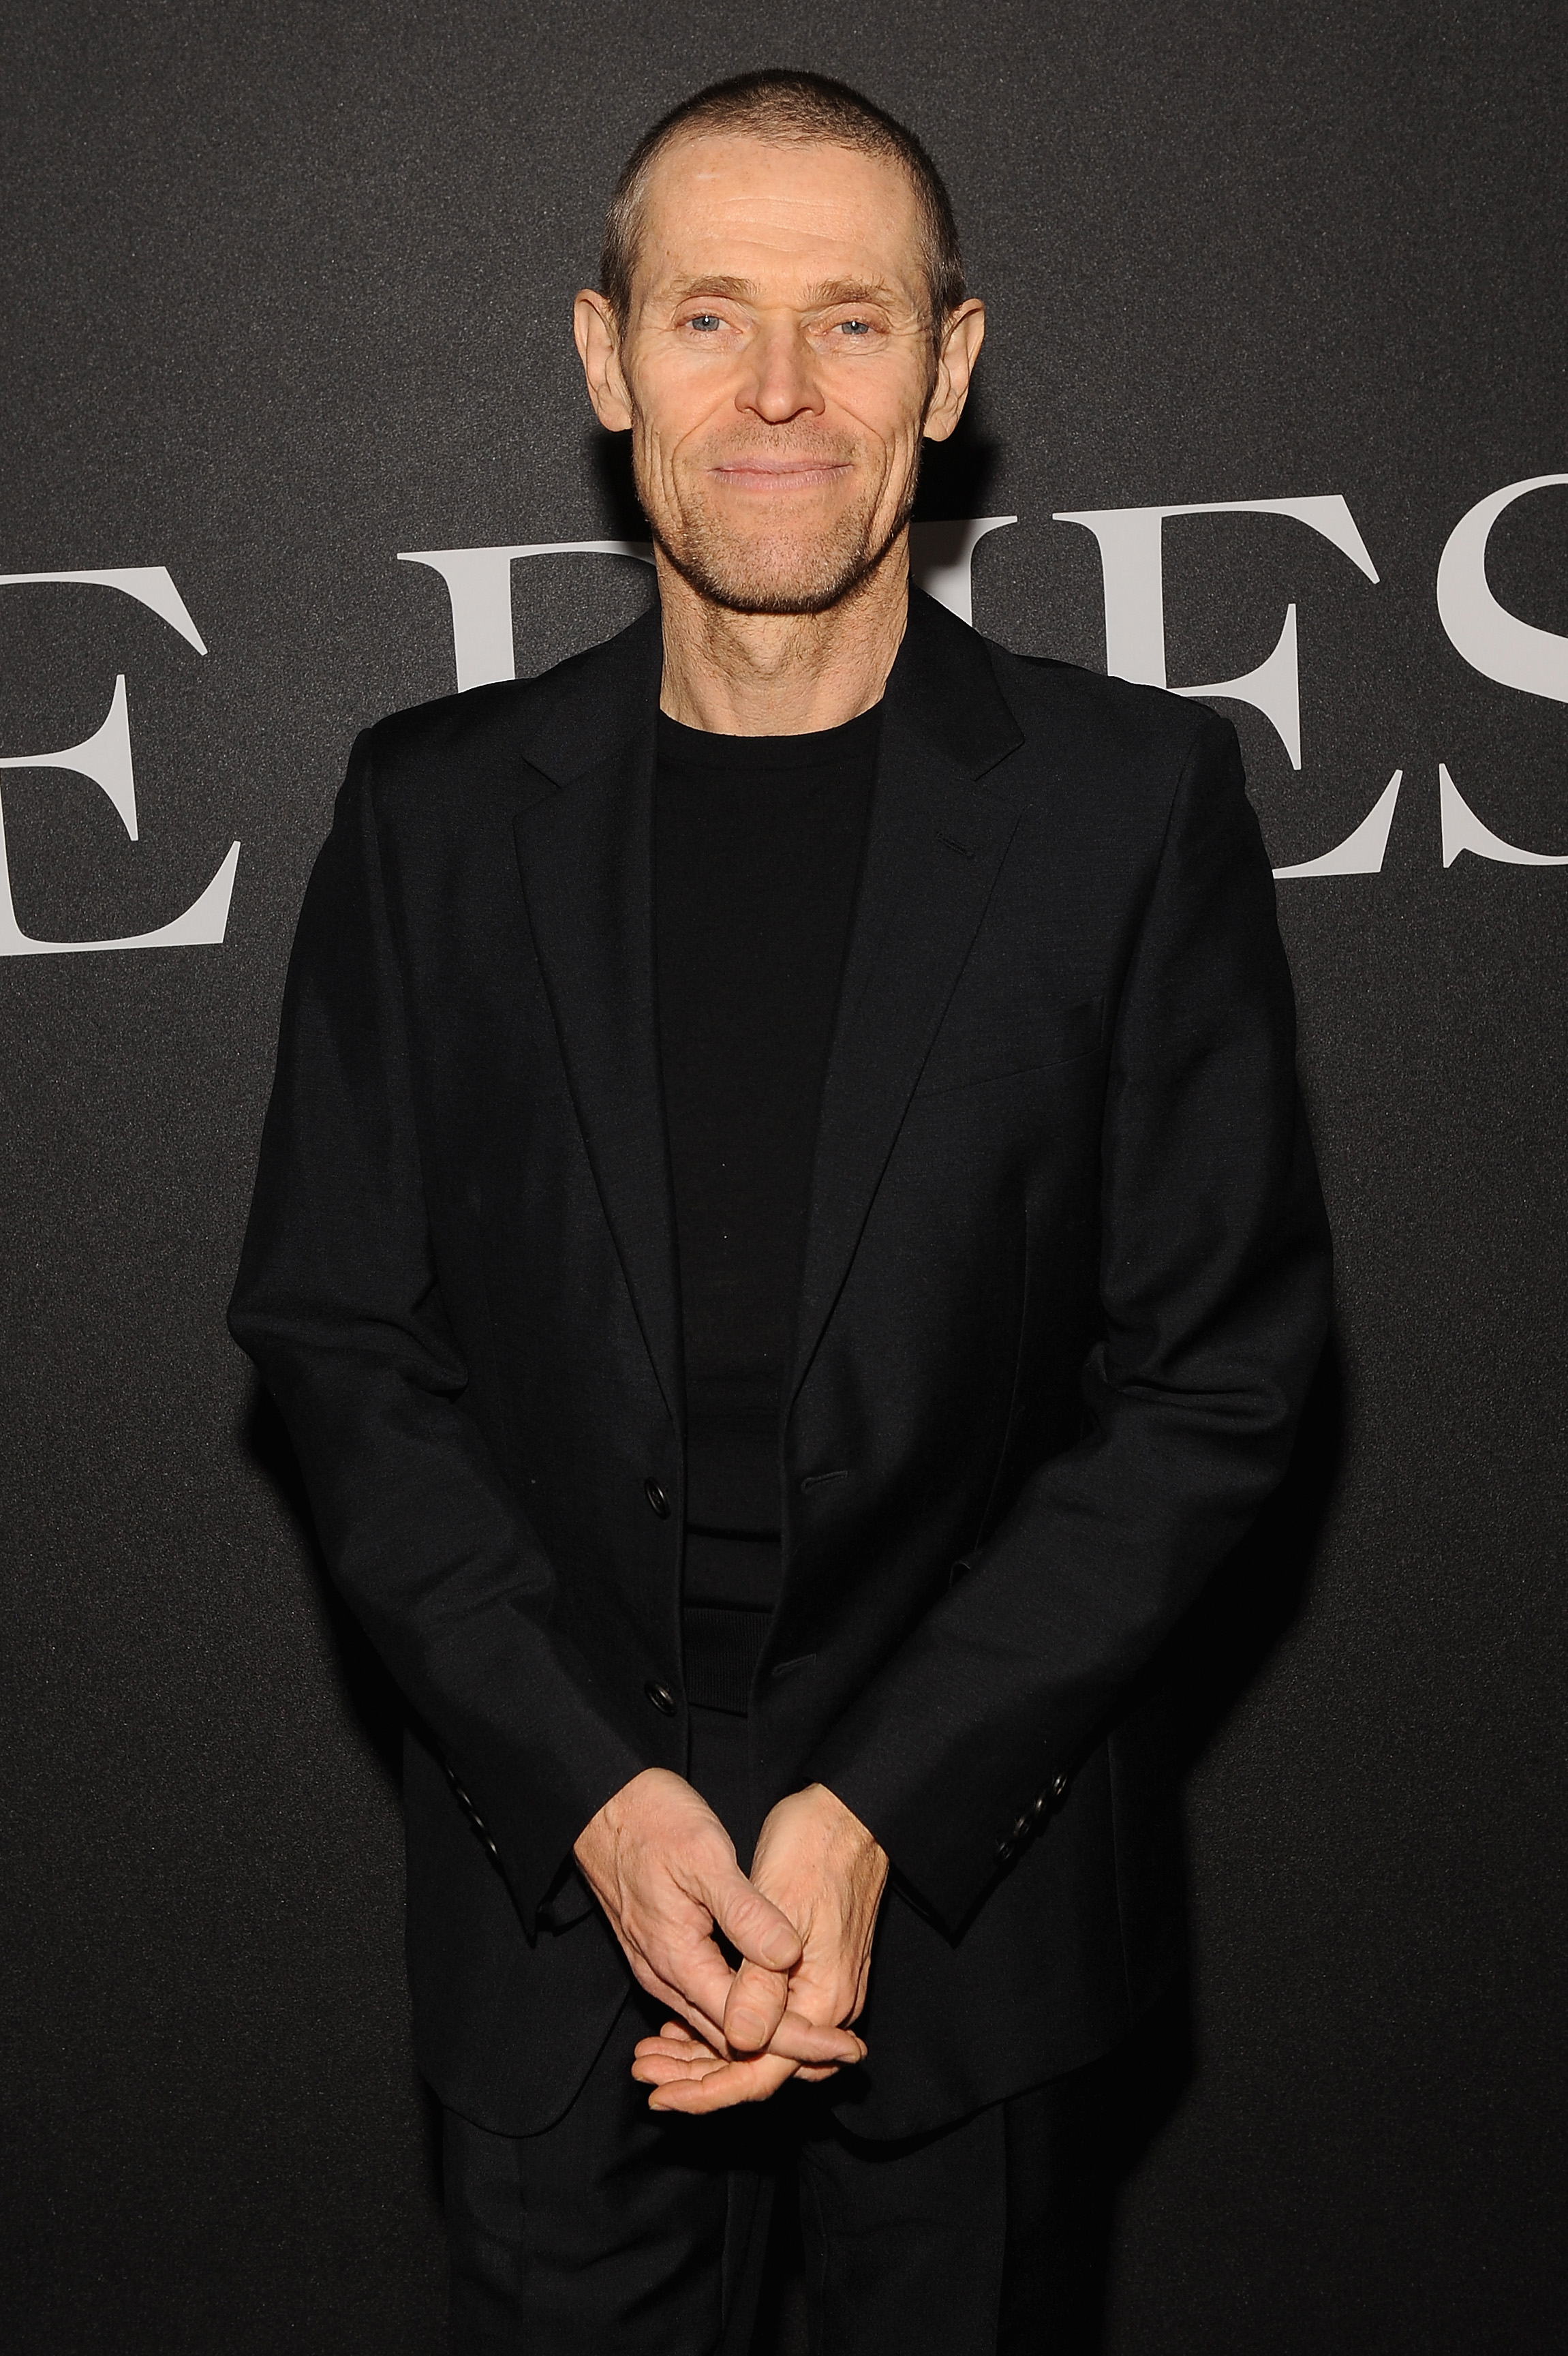 Willem Dafoe attends the Miu Miu Women's Tales 9th Edition "De Djess" screening on February 18, 2015, in New York City. | Source: Getty Images